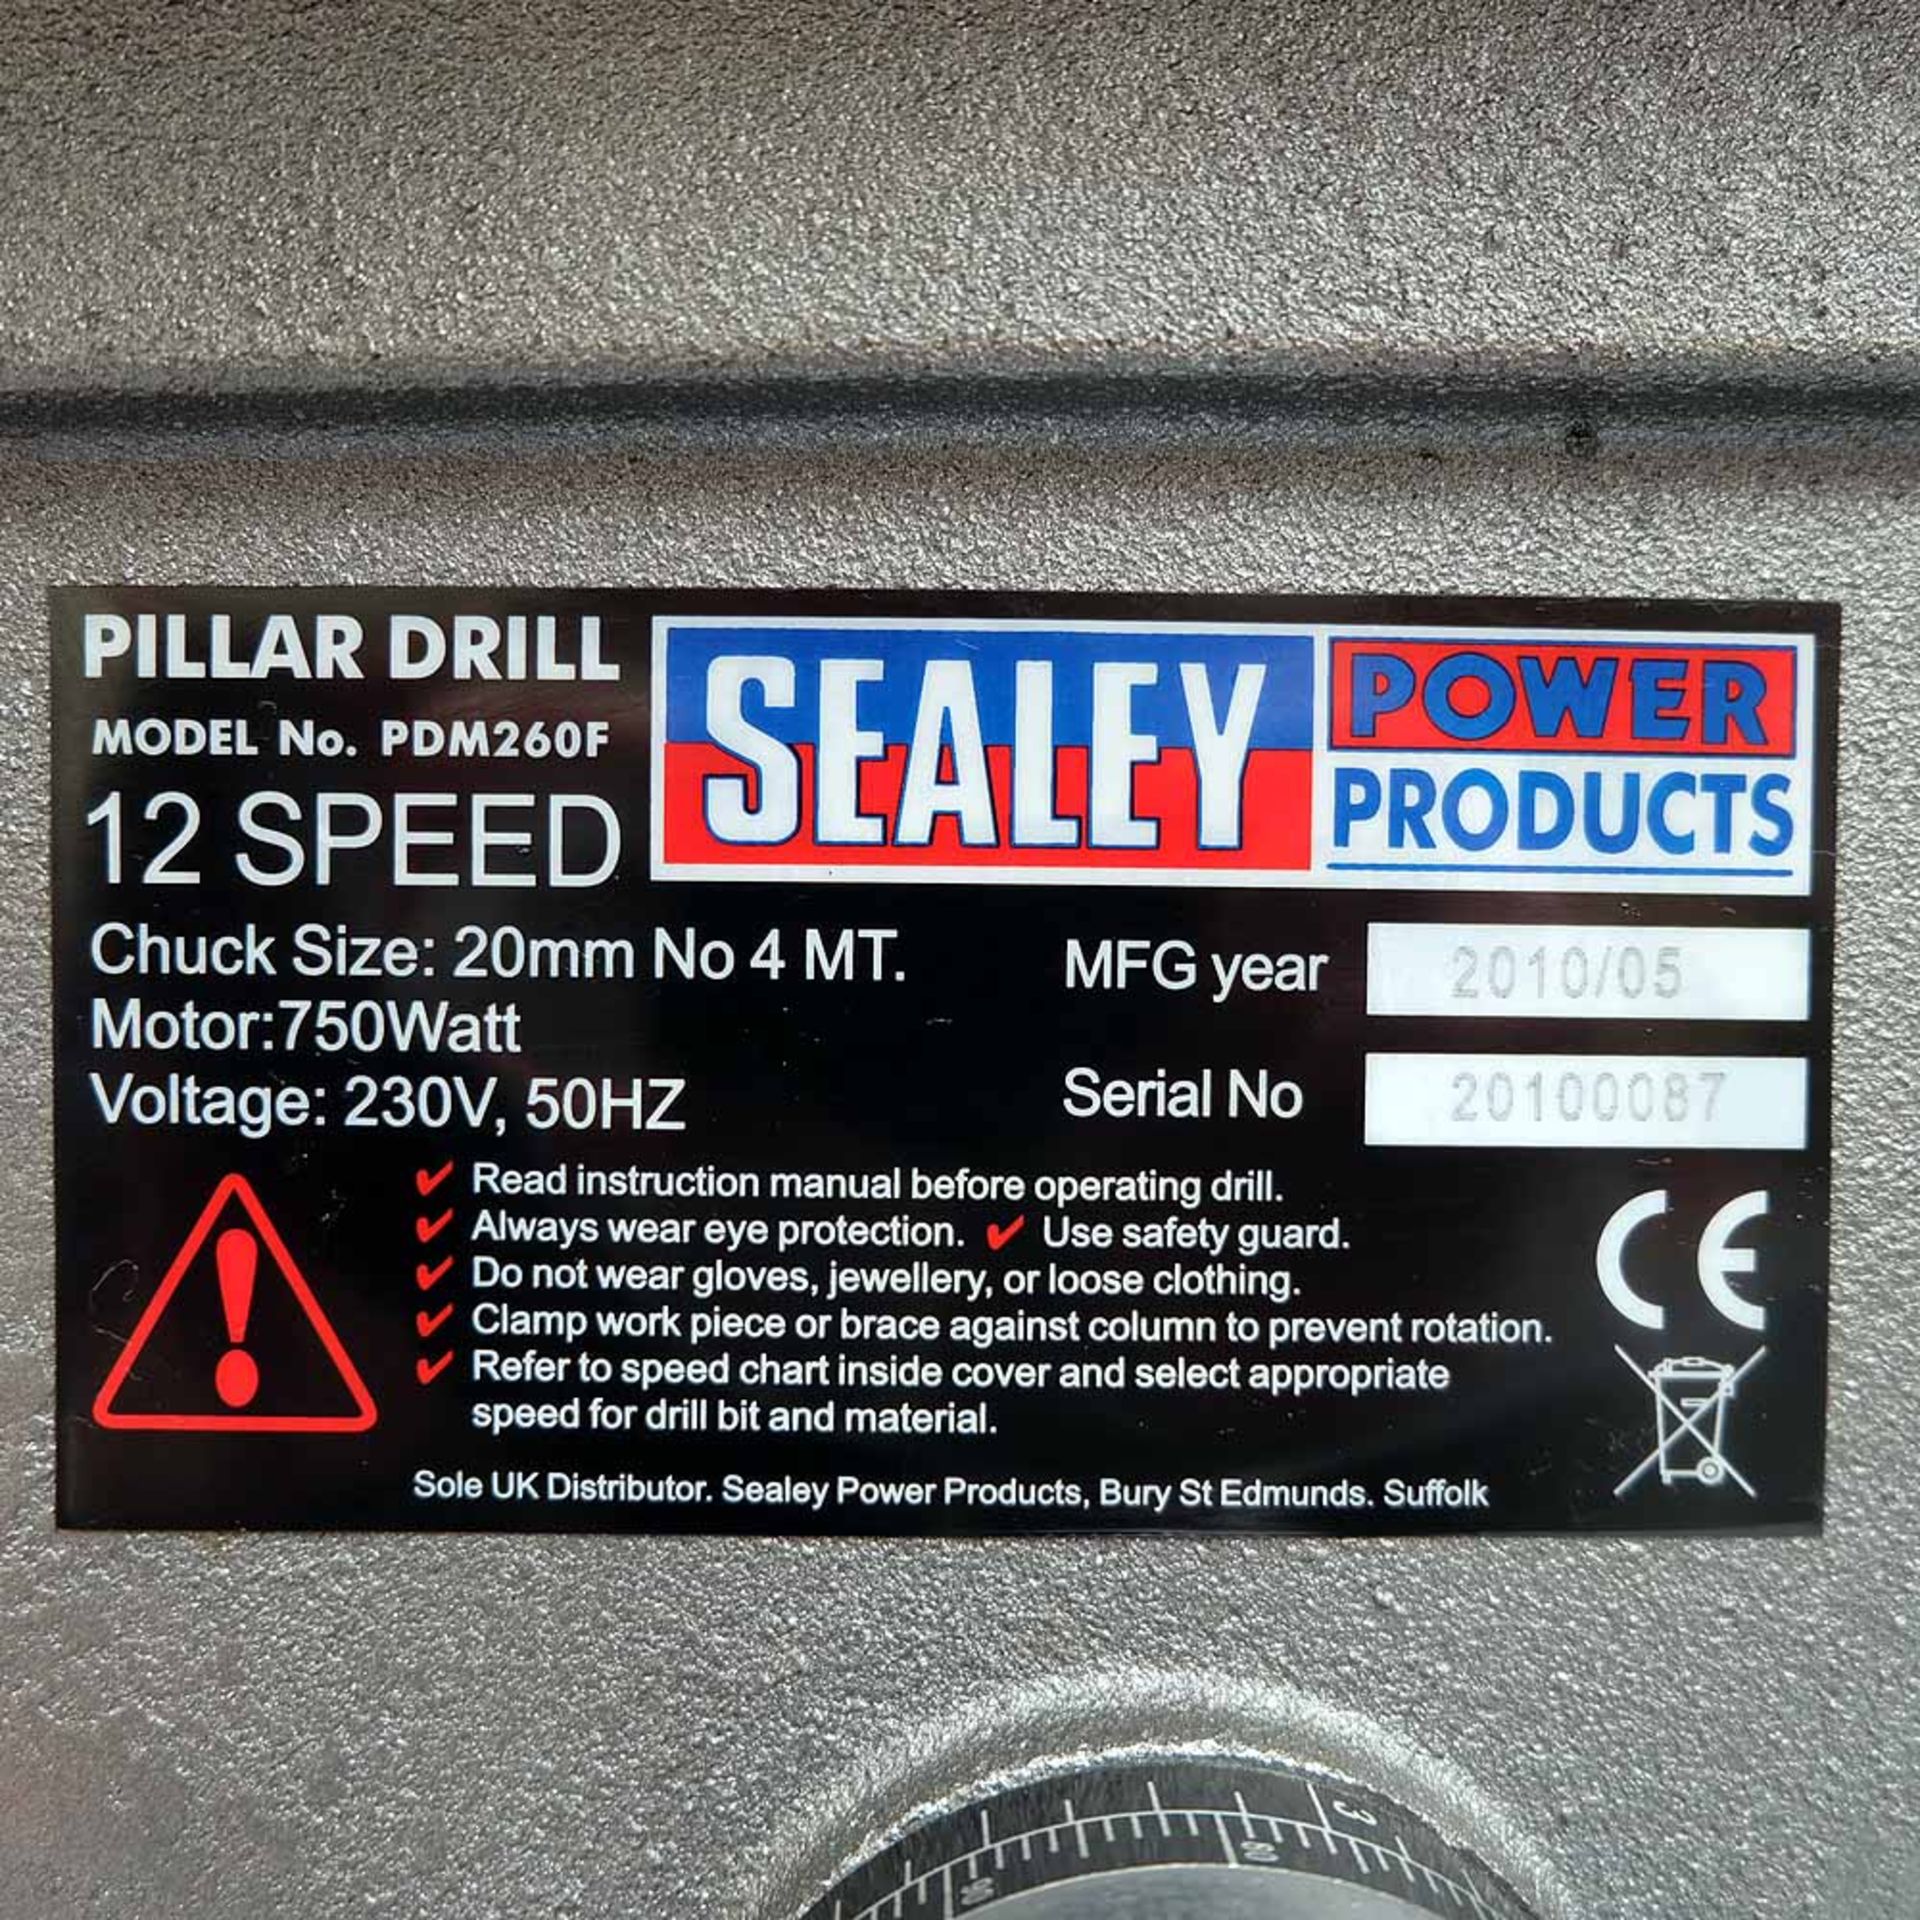 Sealey Model PDM260F 12 Speed Pillar Drill. Spindle Taper No.4 Morse. Capacity 20mm. Spindle Speeds - Image 6 of 8